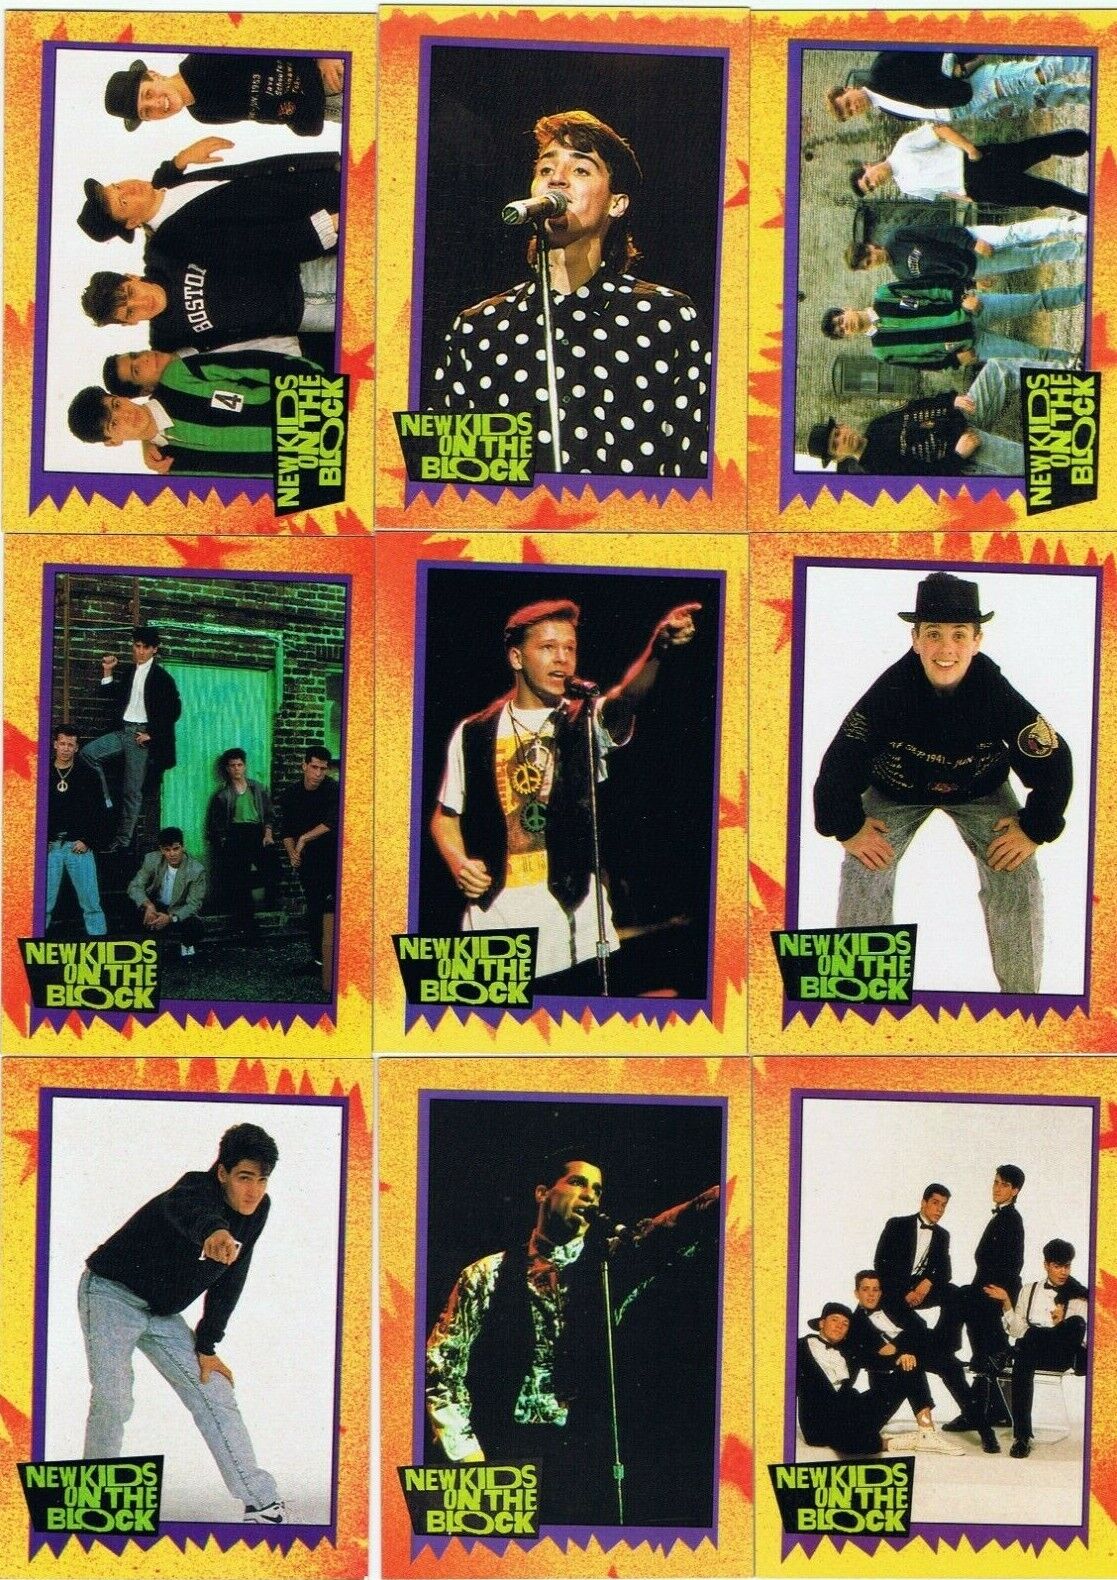 New Kids on the Block Series 1 Topps 1989 Singles. Check List. $1 each + Discnts